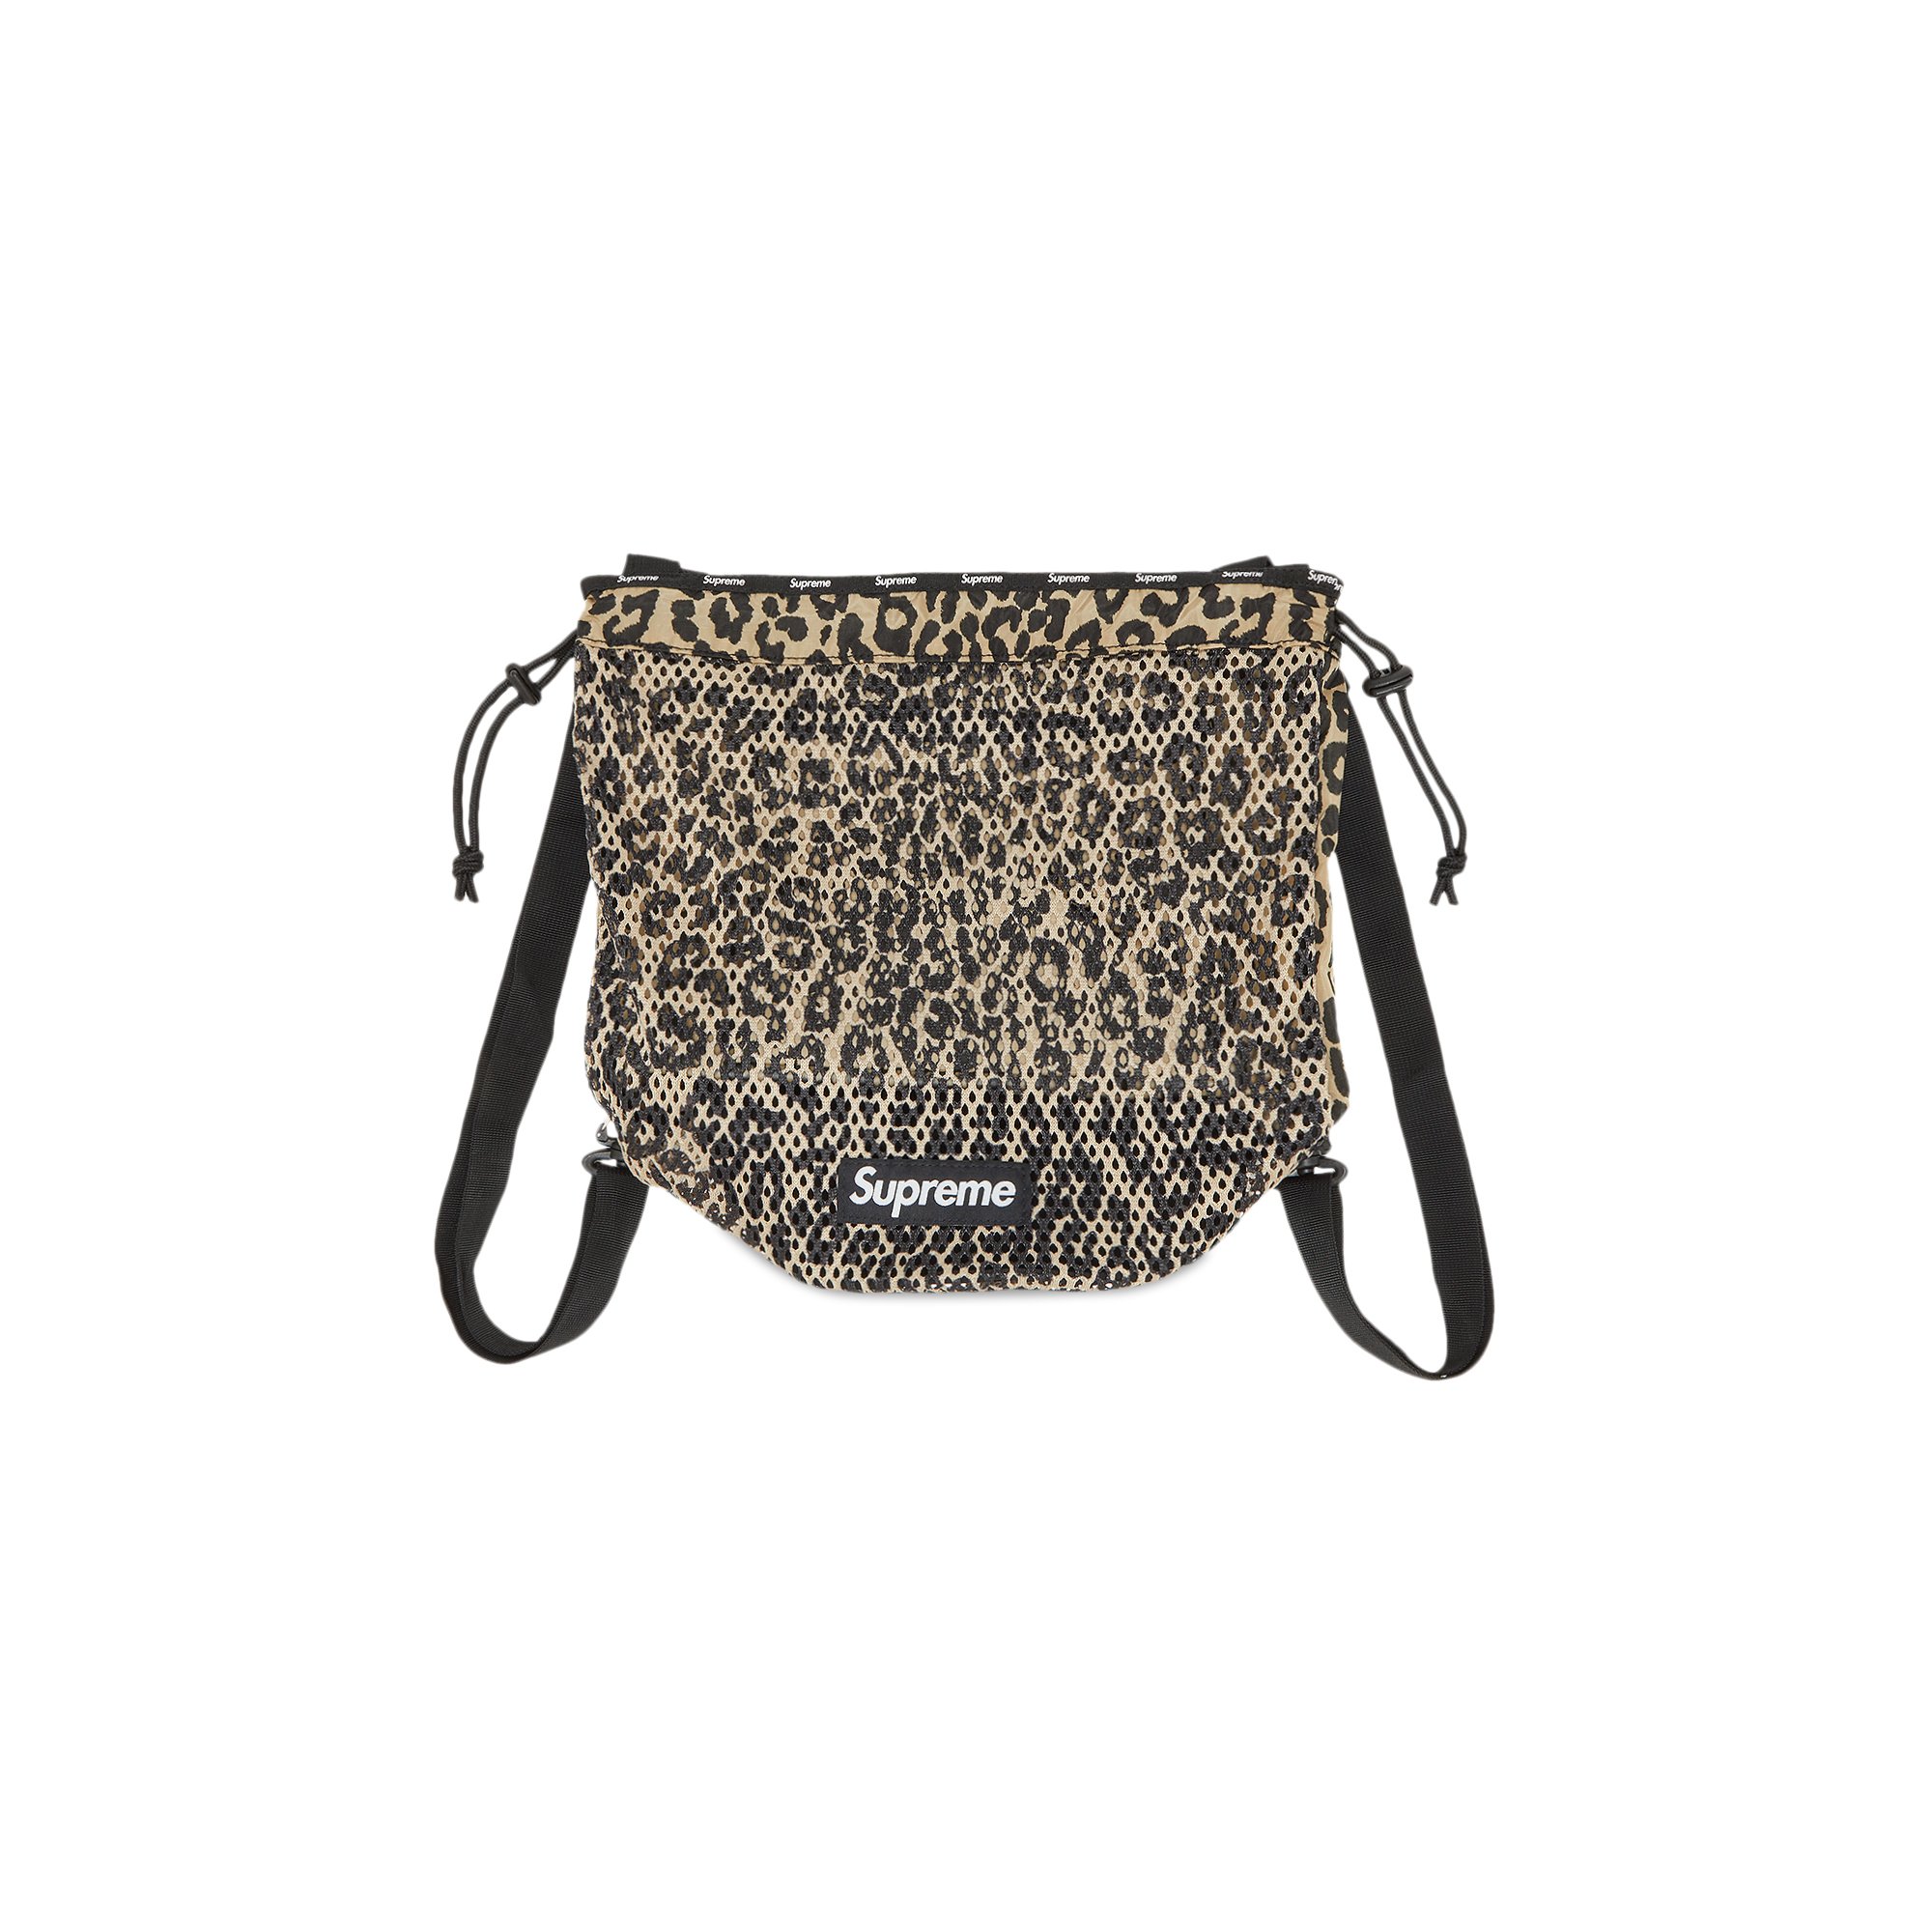 Supreme Mesh Small Backpack 'Leopard'